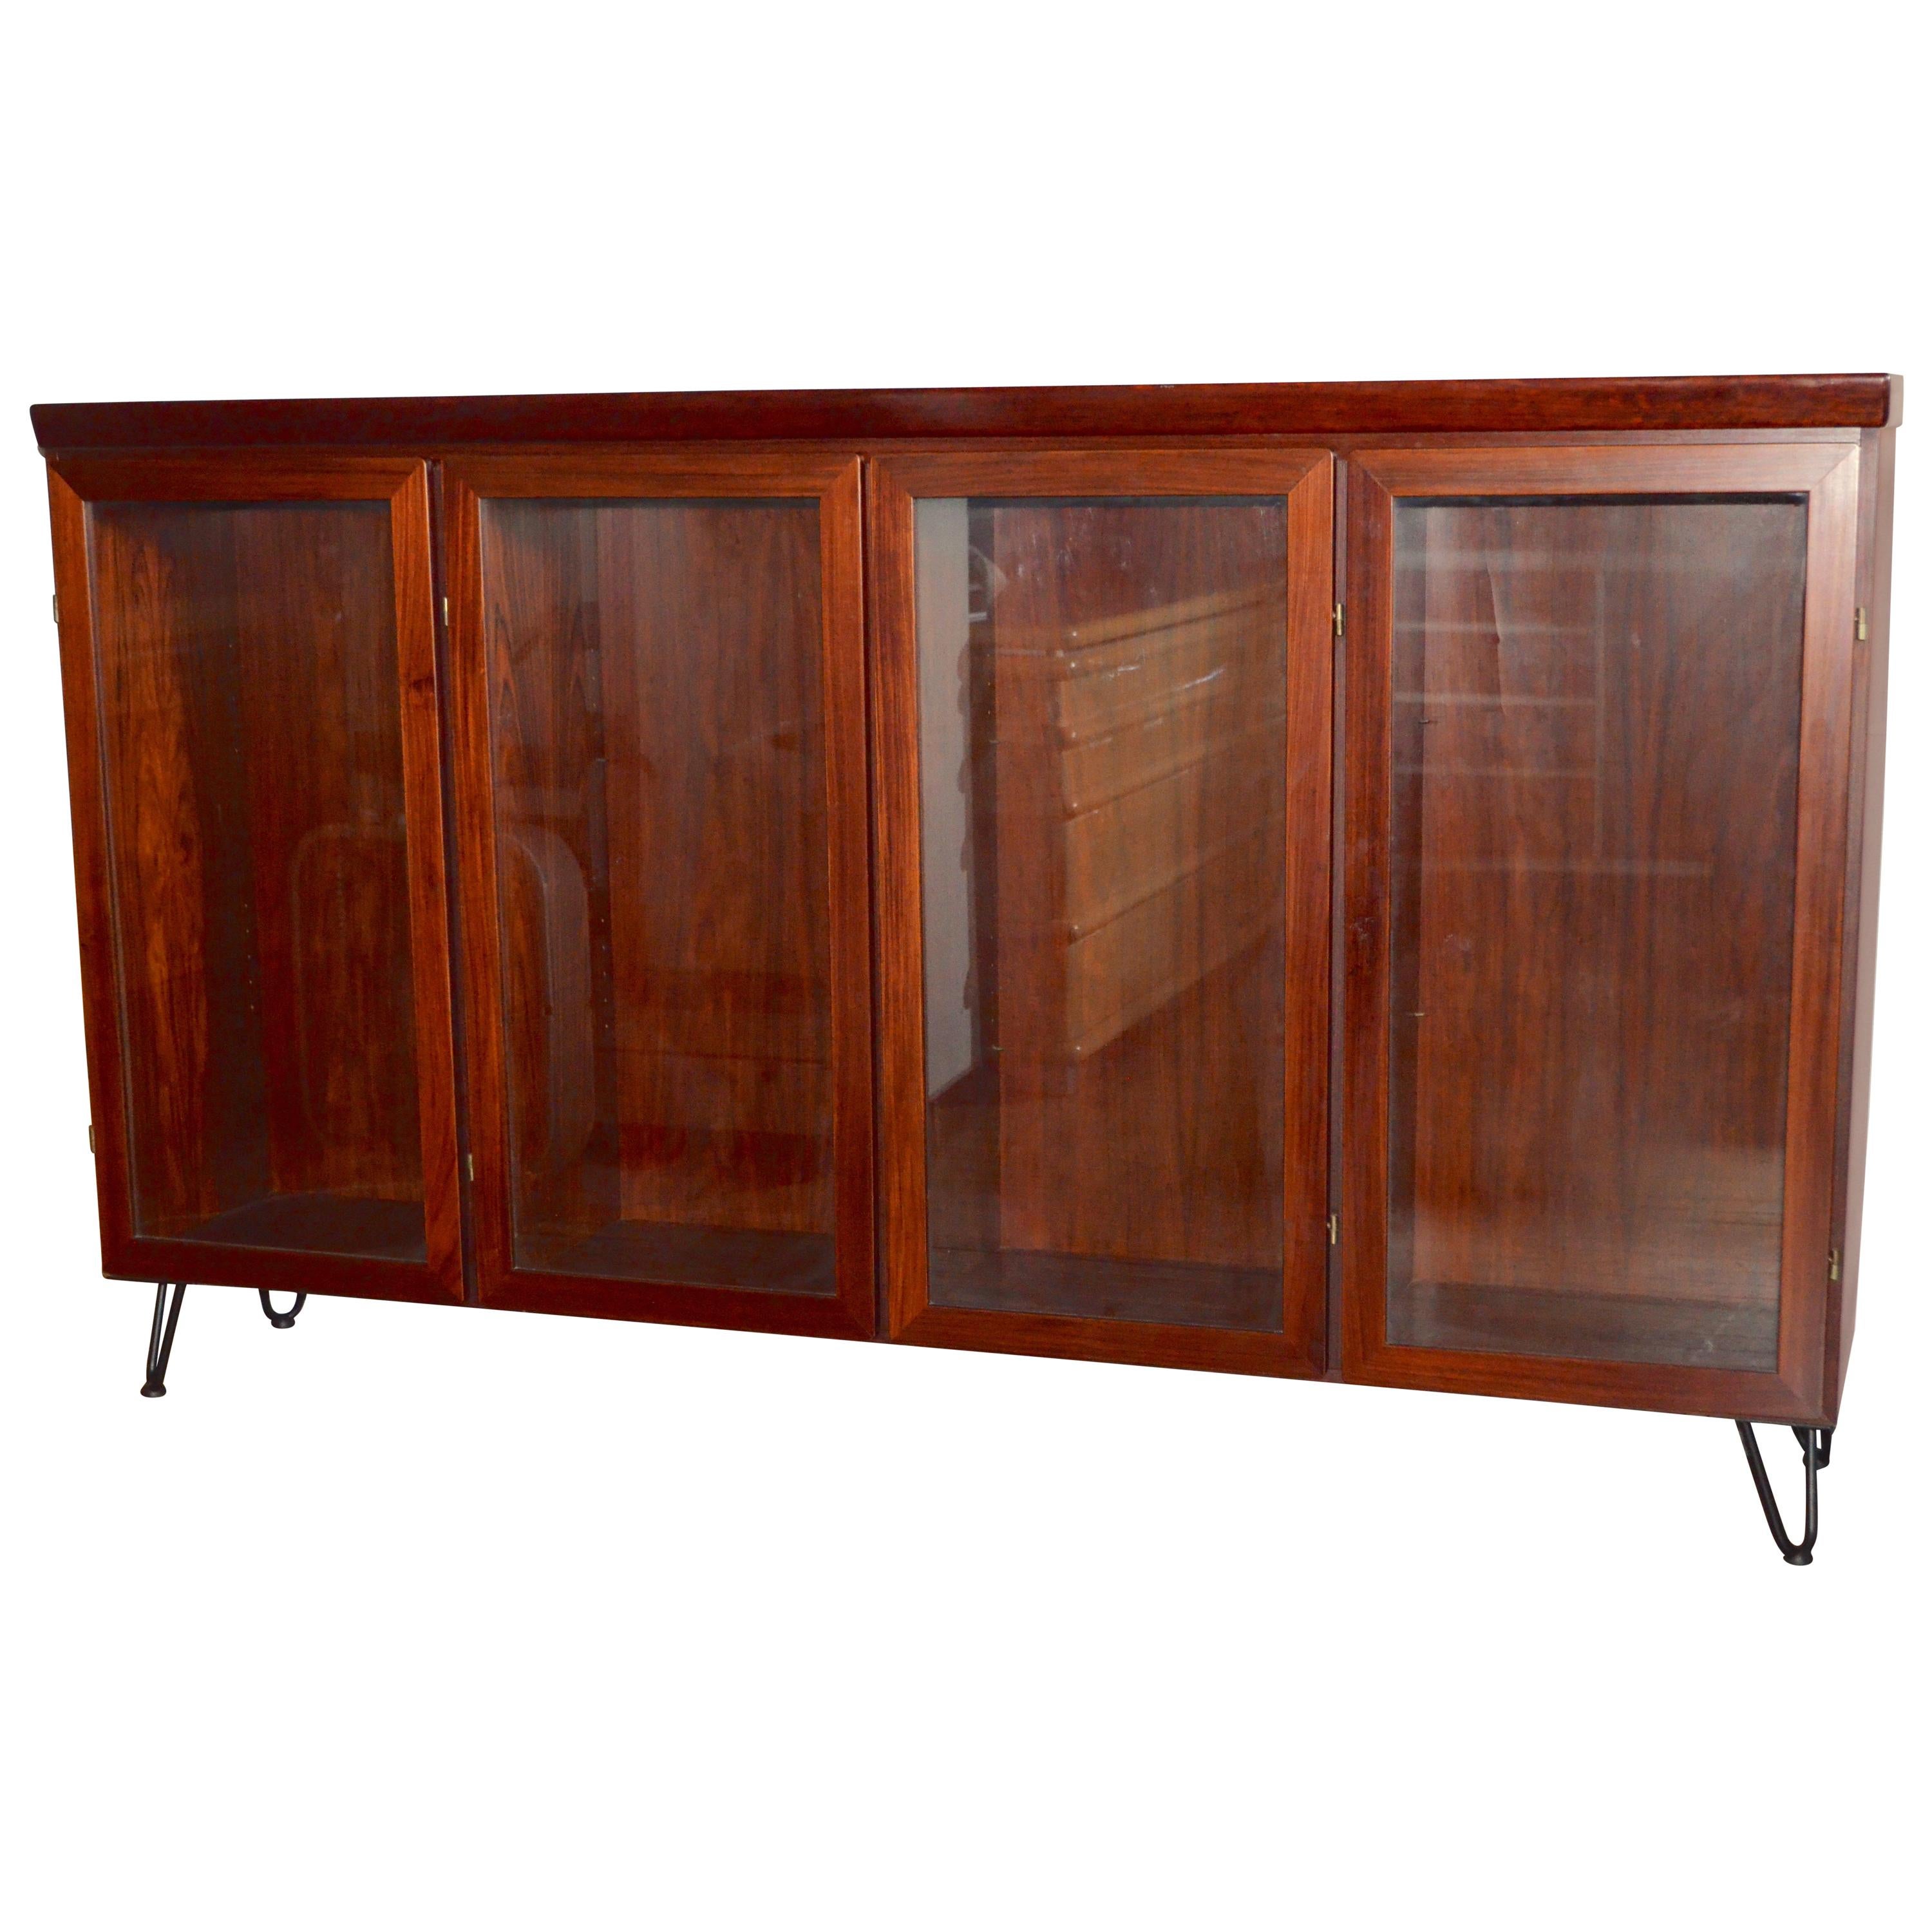 Midcentury Redwood Credenza from Skovby Mounted on High Hairpin Legs